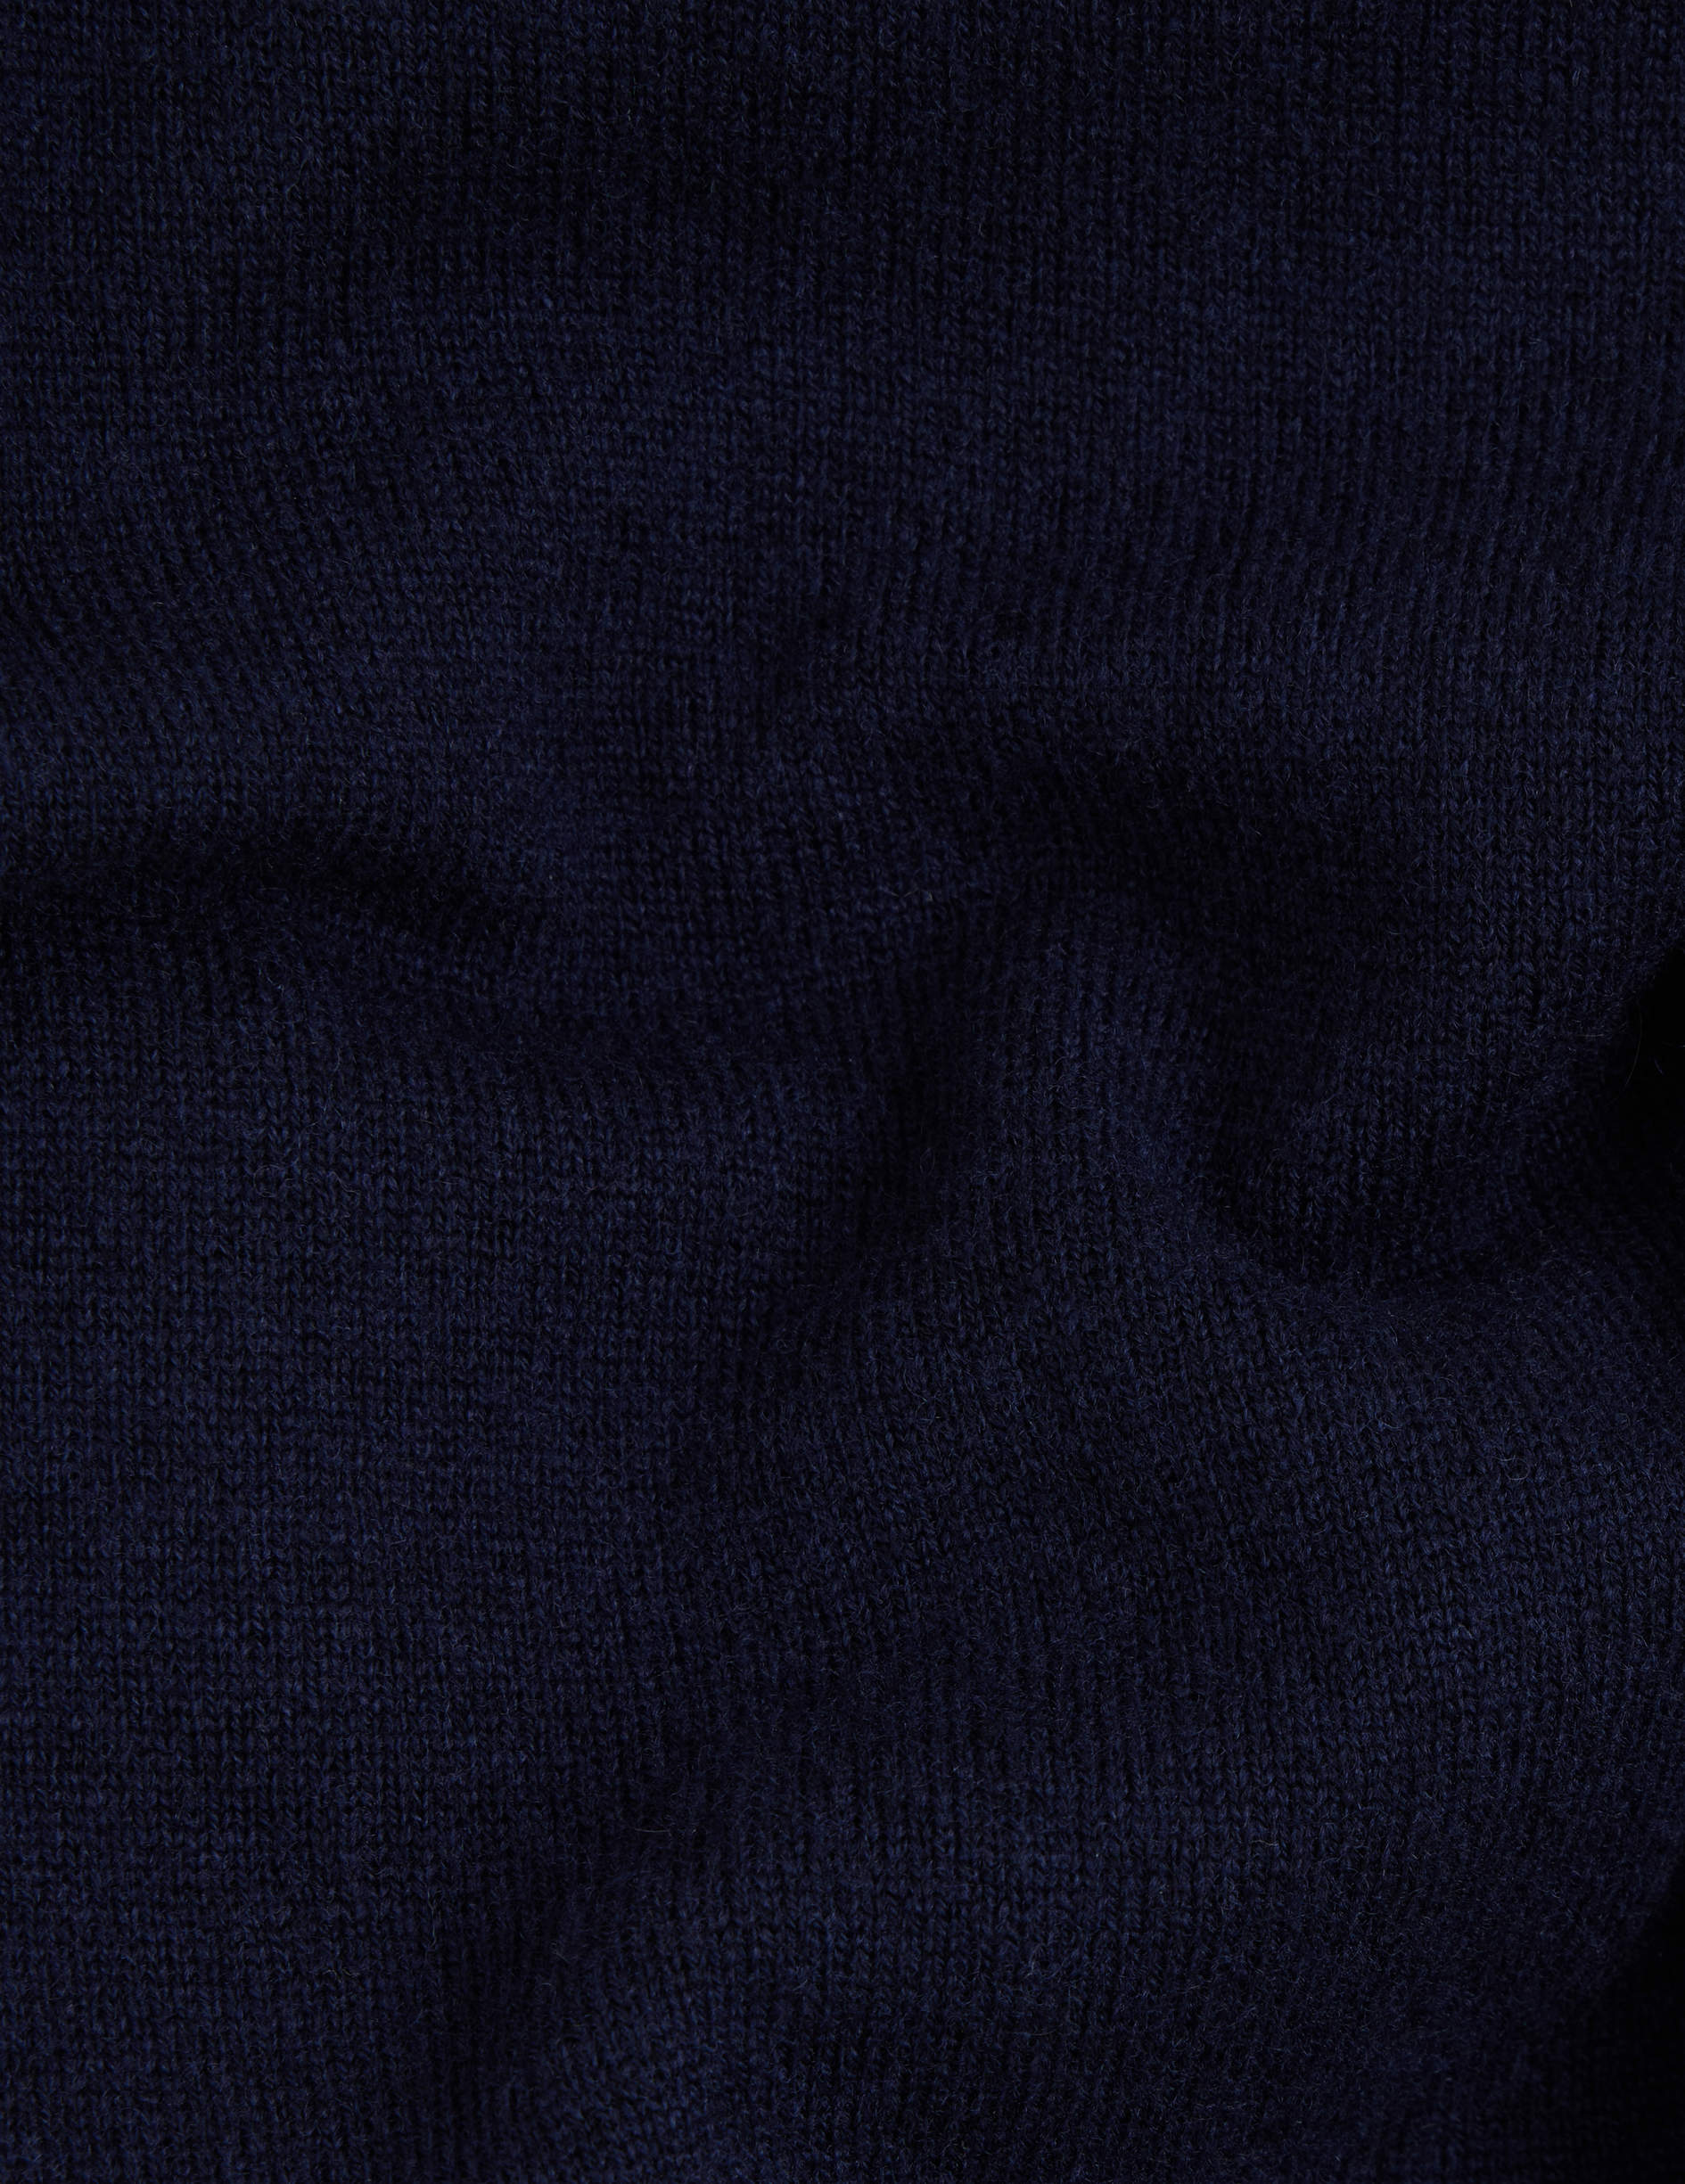 Navy wool and cashmere Emile jumper